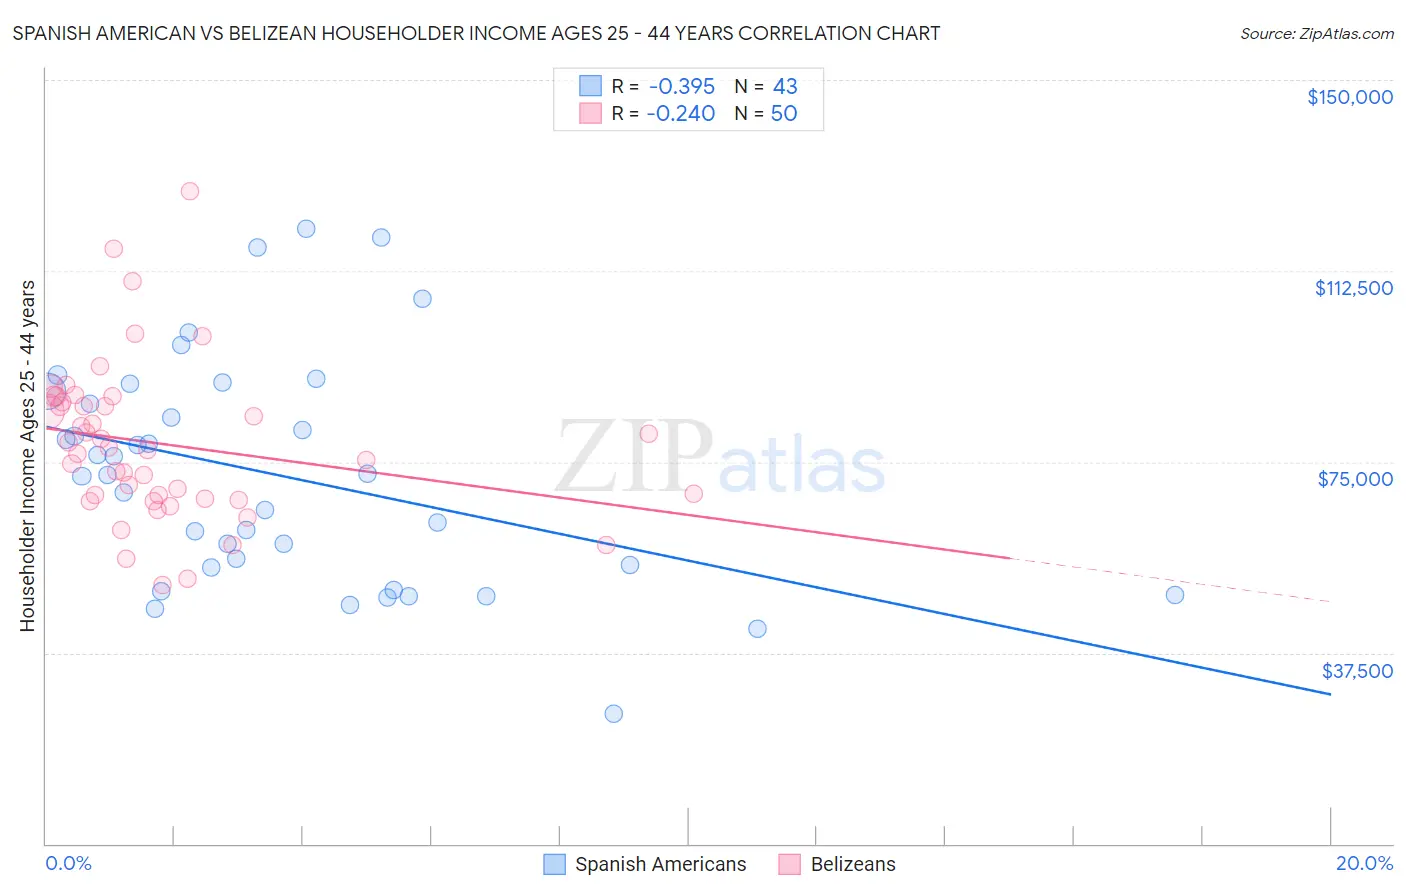 Spanish American vs Belizean Householder Income Ages 25 - 44 years